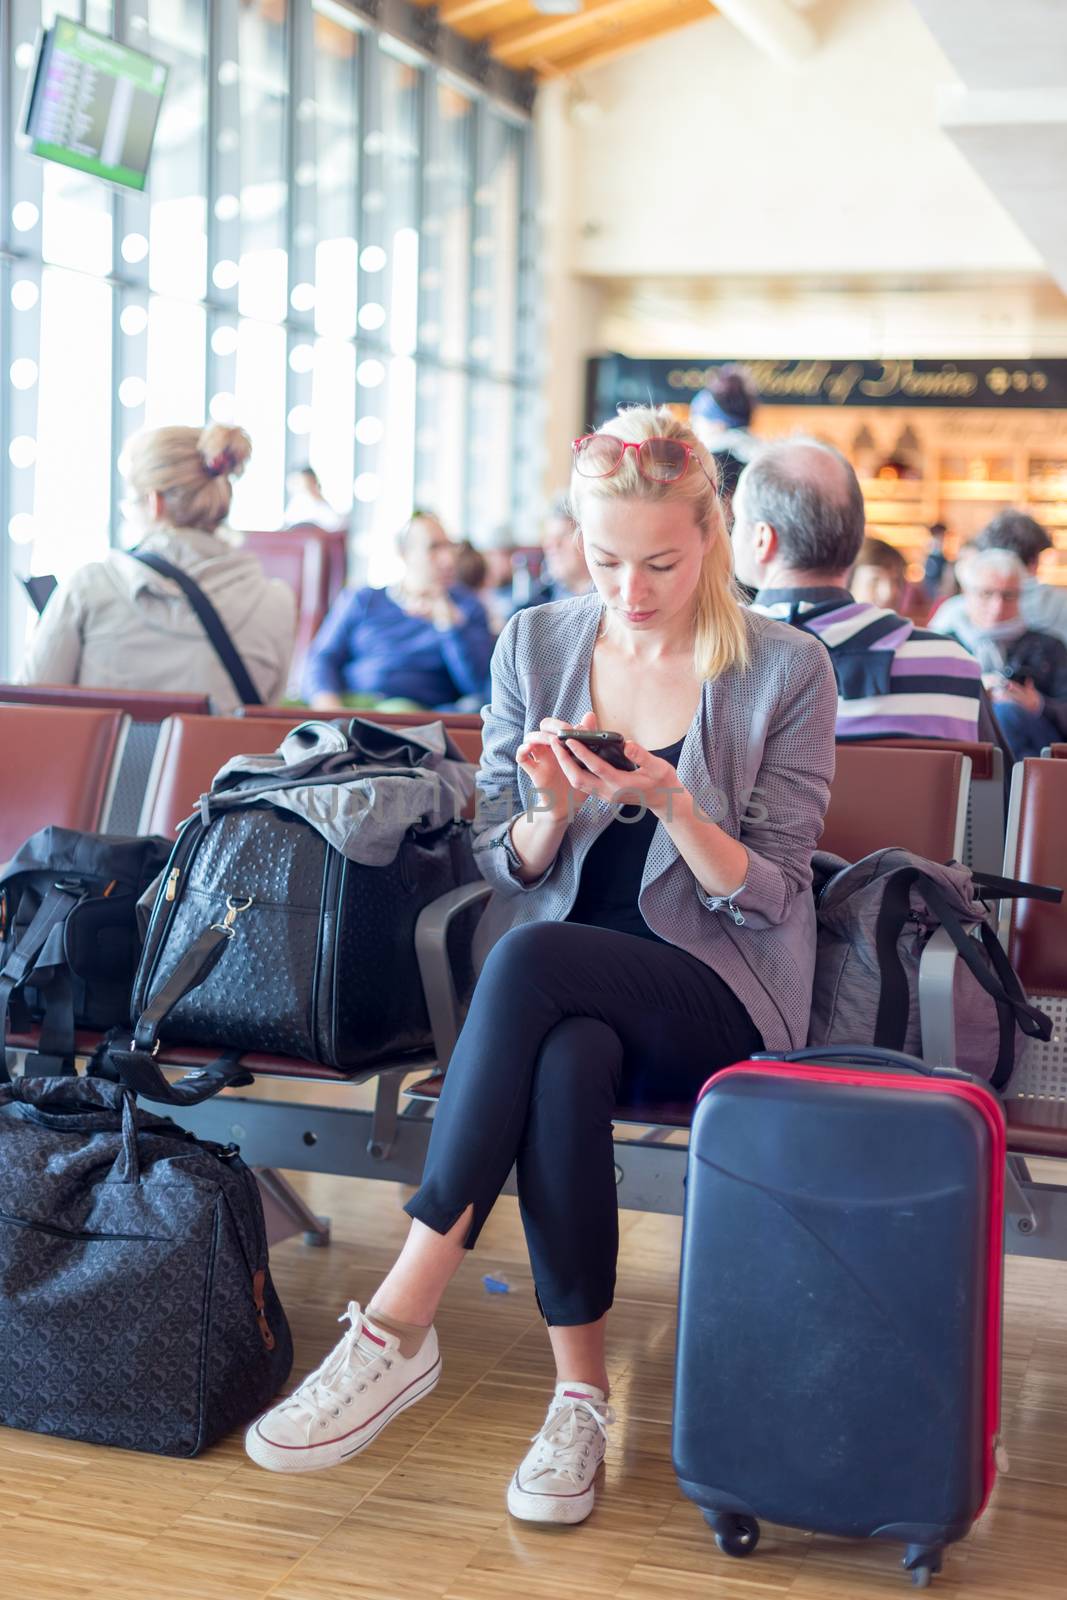 Casual blond young woman using her cell phone while waiting to board a plane at the departure gates. Wireless network hotspot enabling people to access internet conection. Public transport.